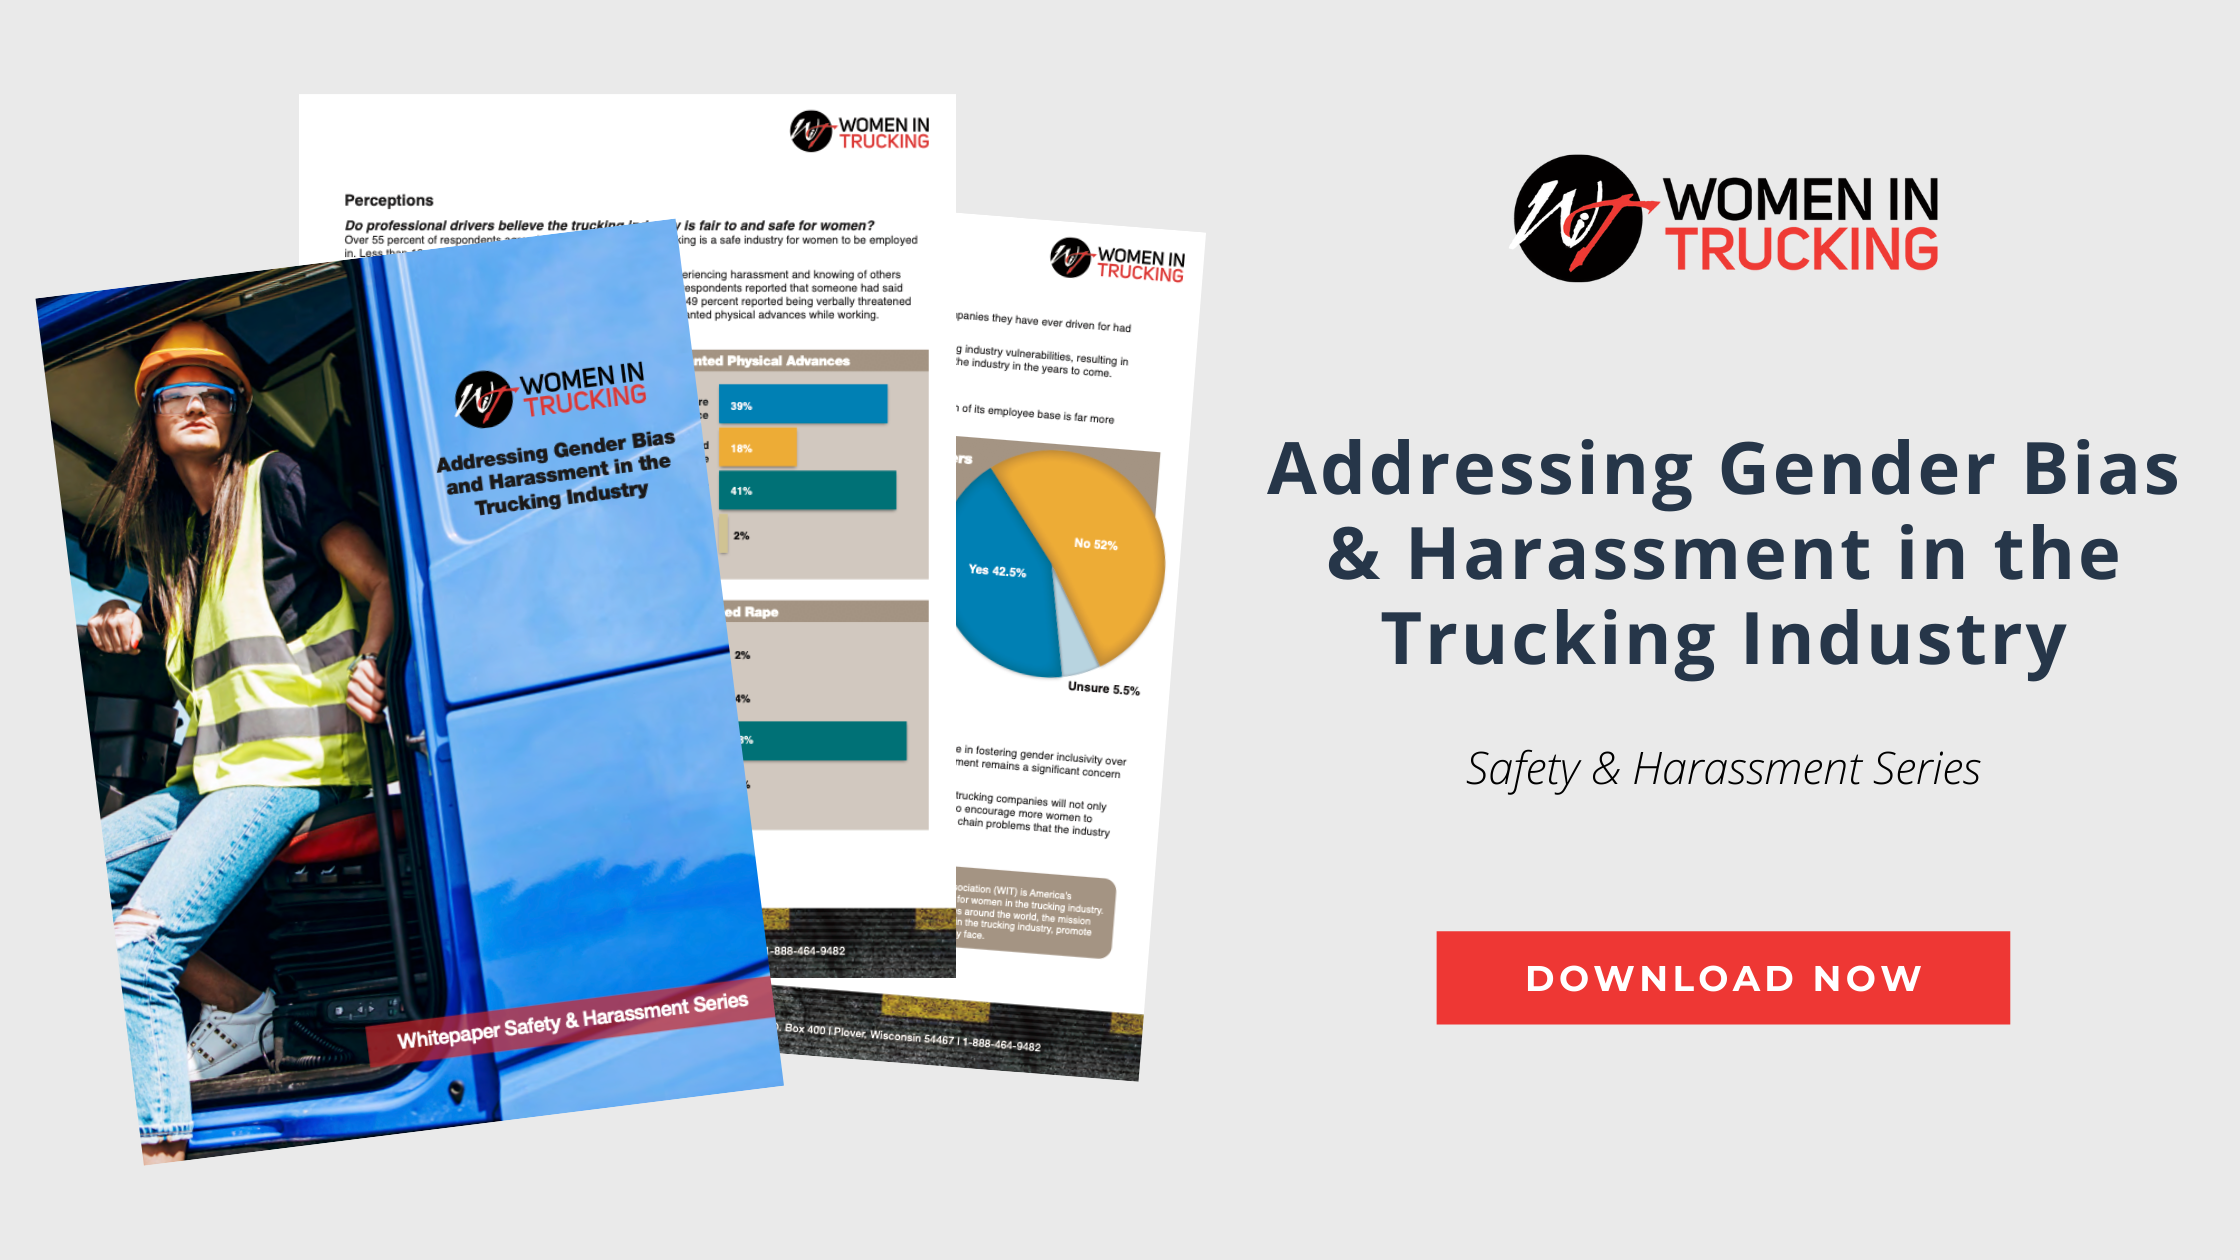 Women In Trucking Association Publishes Whitepaper on Addressing Gender Bias and Harassment Toward Professional Drivers